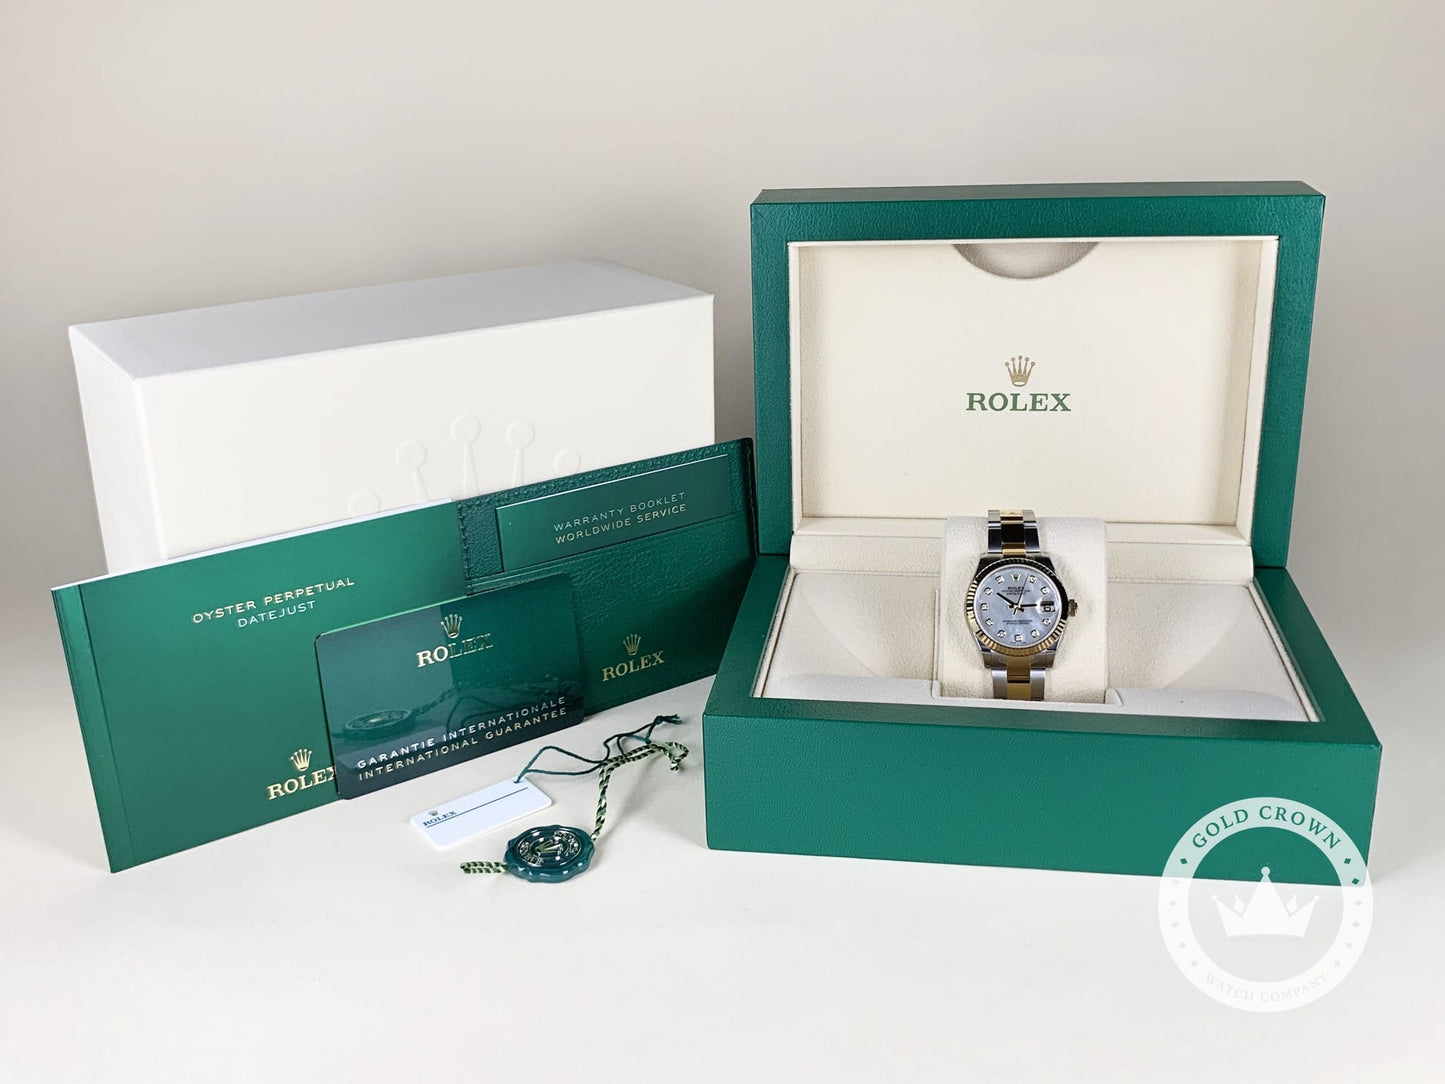 Brand New Rolex Datejust  278273 “Mother of Pearl Dial” Full Set